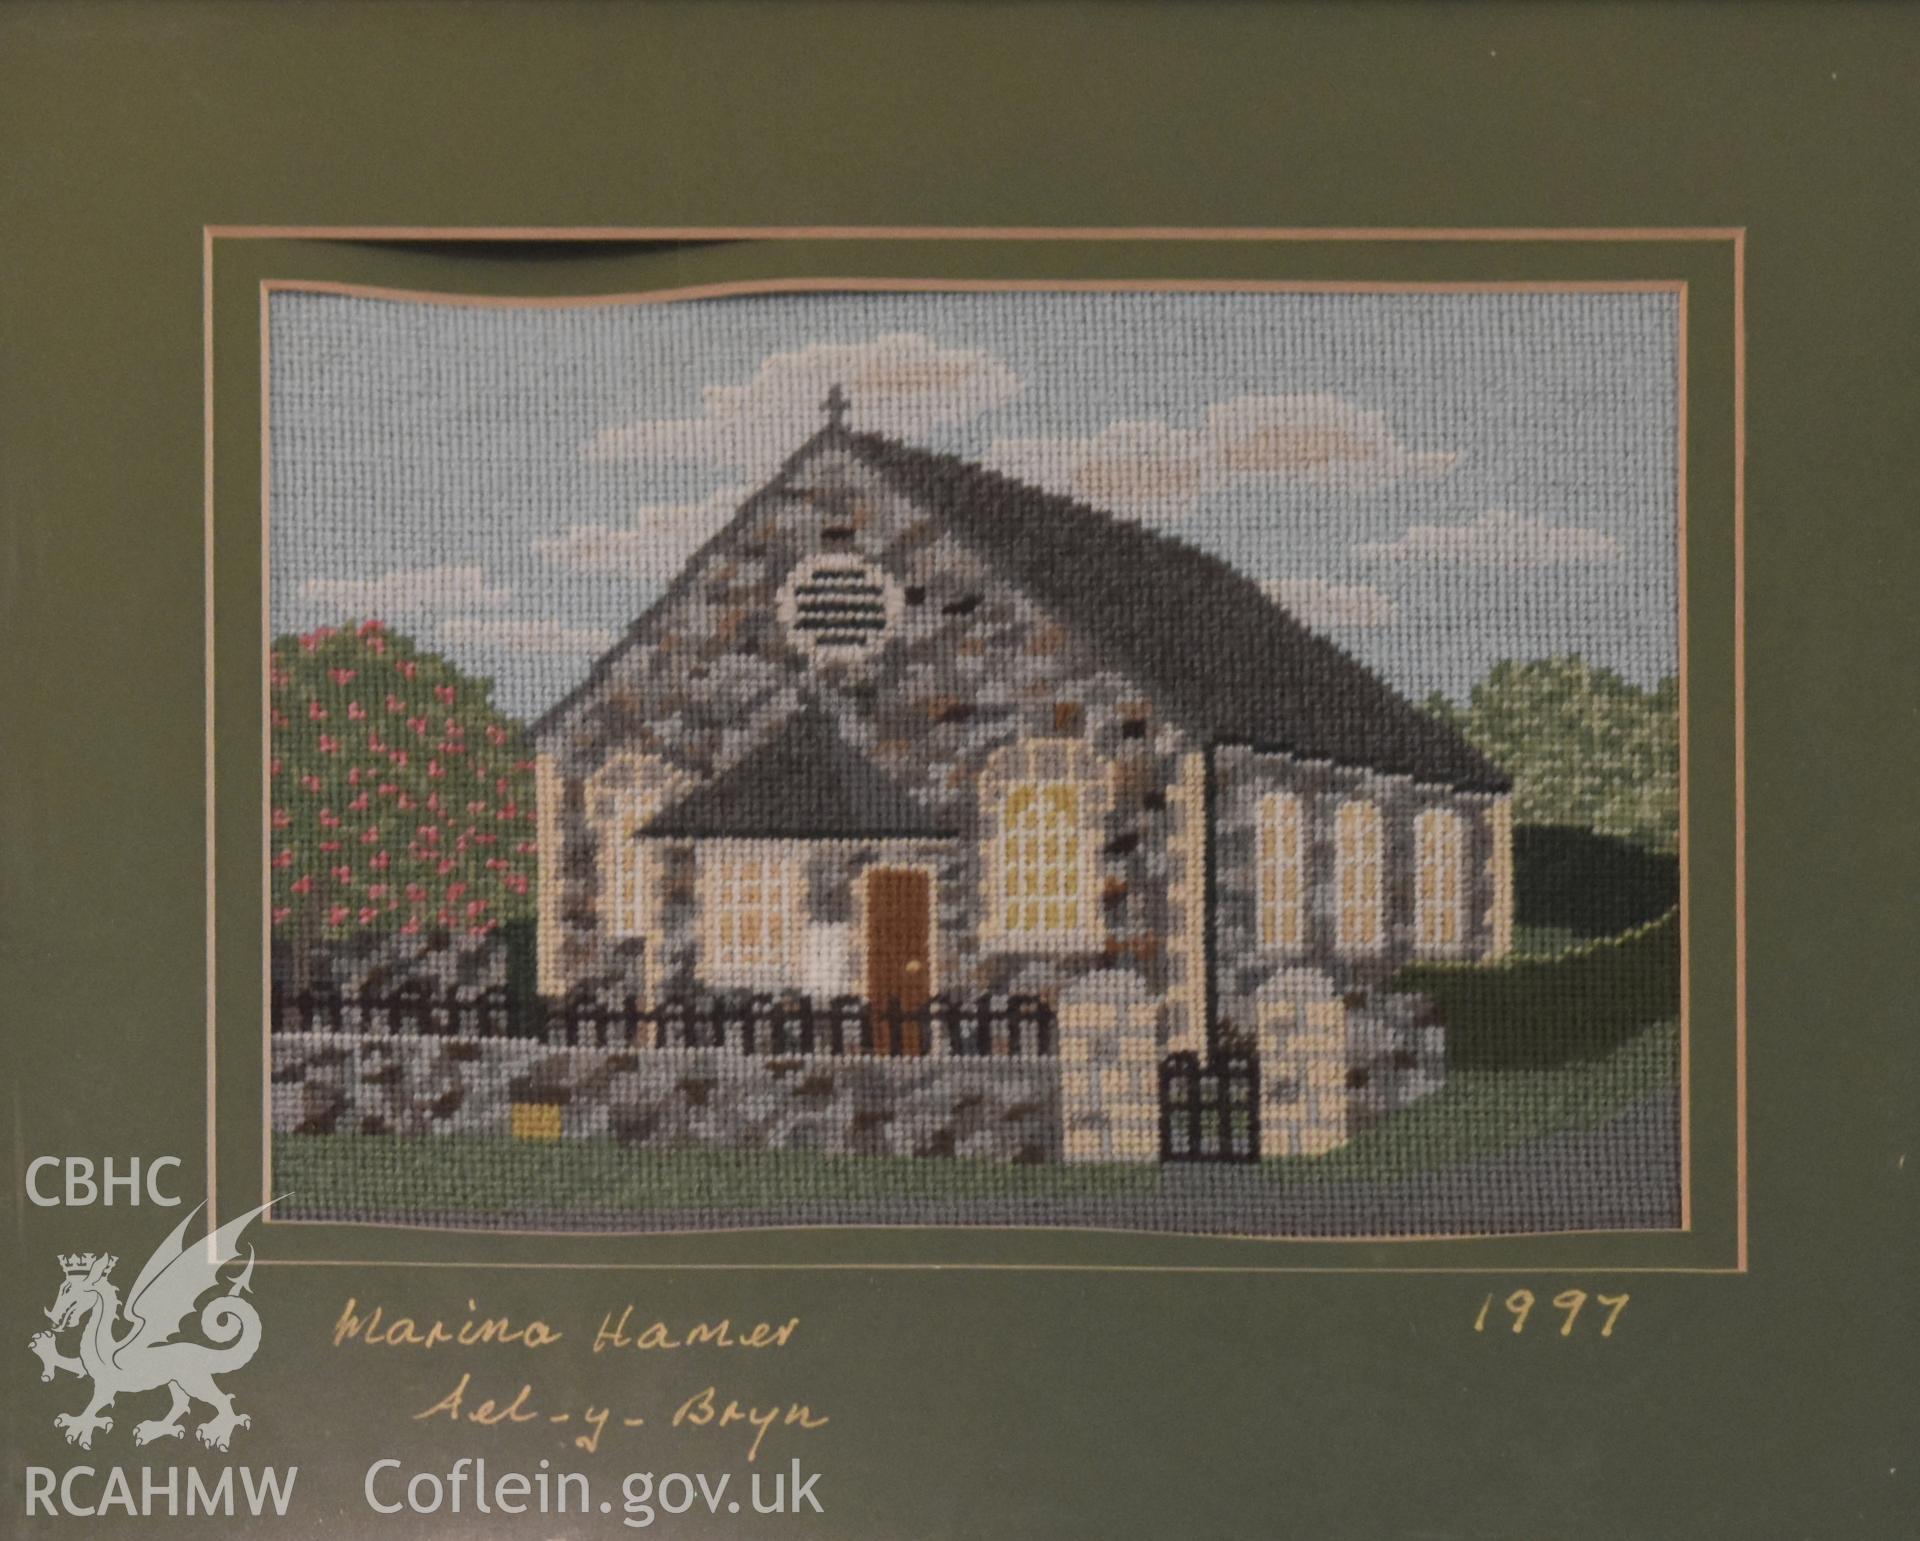 Detailed view of the tapestry of Hyssington Chapel, signed 'Marina Hamer, Ael-y-Bryn 1997' at Hyssington Primitive Methodist Chapel, Hyssington, Churchstoke. Photographic survey conducted by Sue Fielding on 7th December 2018.